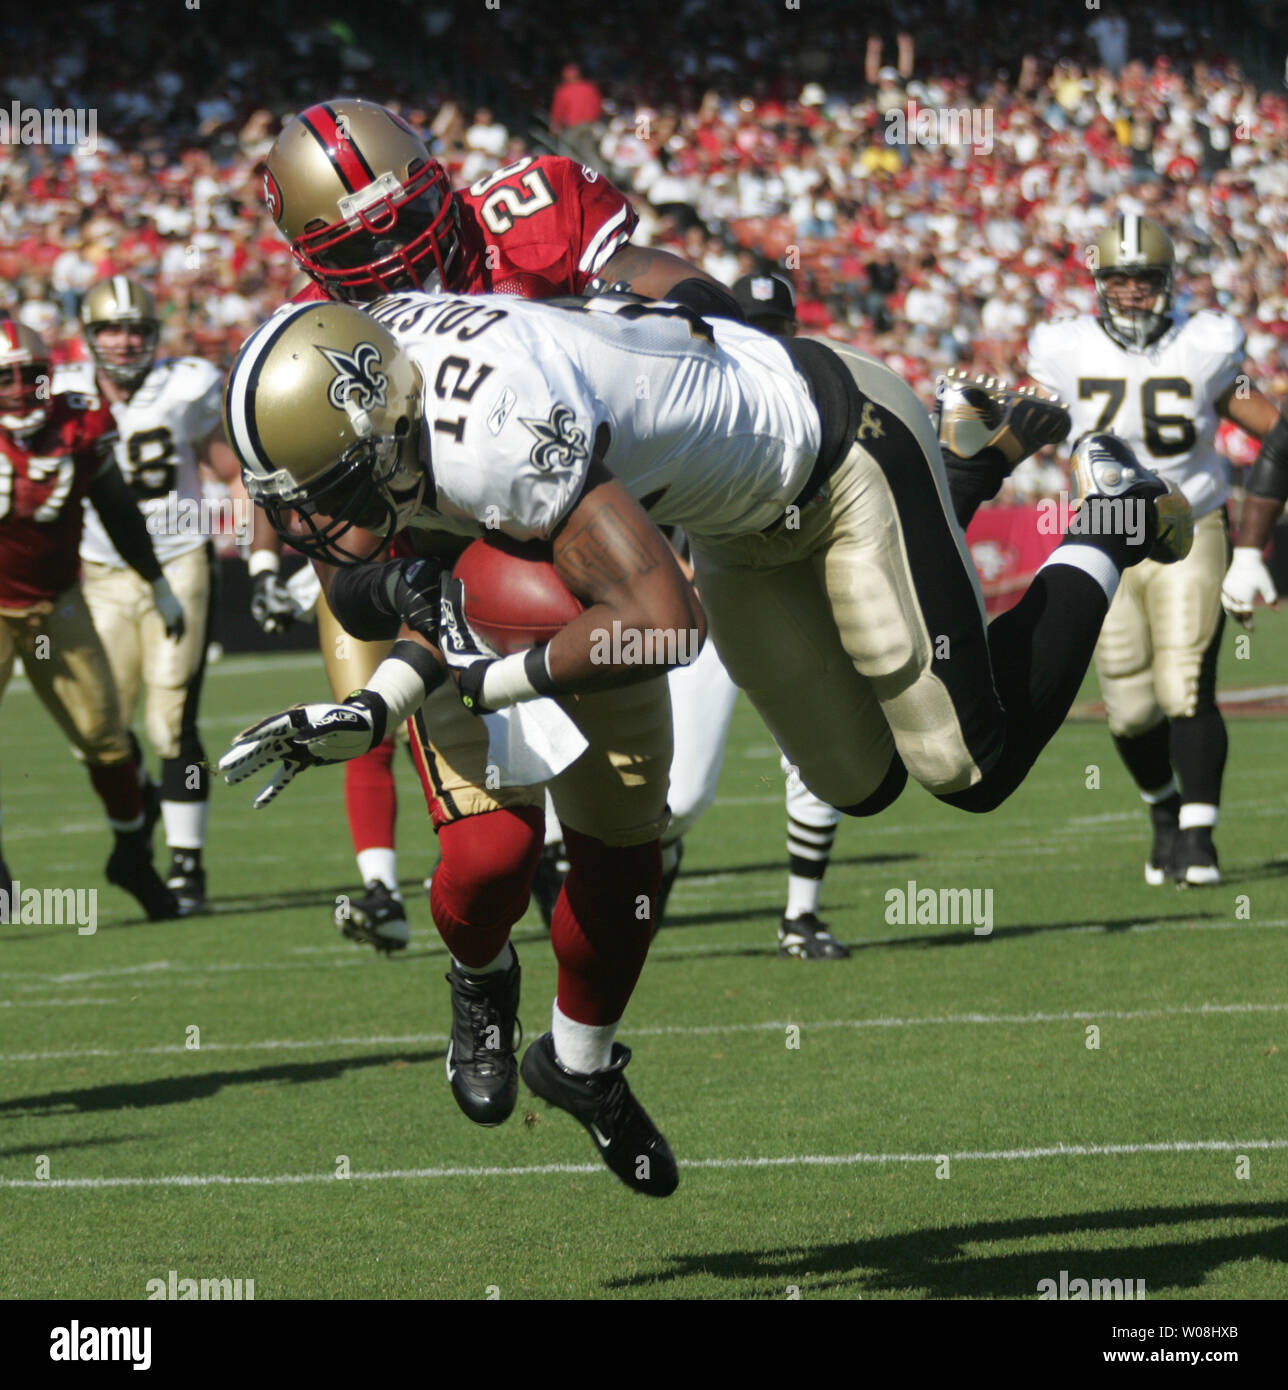 New Orleans Saints WR Marques Colston (12) dives into the end zone  past  San Francisco 49ers Mark Roman with a Drew Brees pass in the first quarter at Monster Park in San Francisco on October 28, 2007.  The Saints defeated the 49ers 31-10. (UPI Photo/Bruce Gordon) Stock Photo